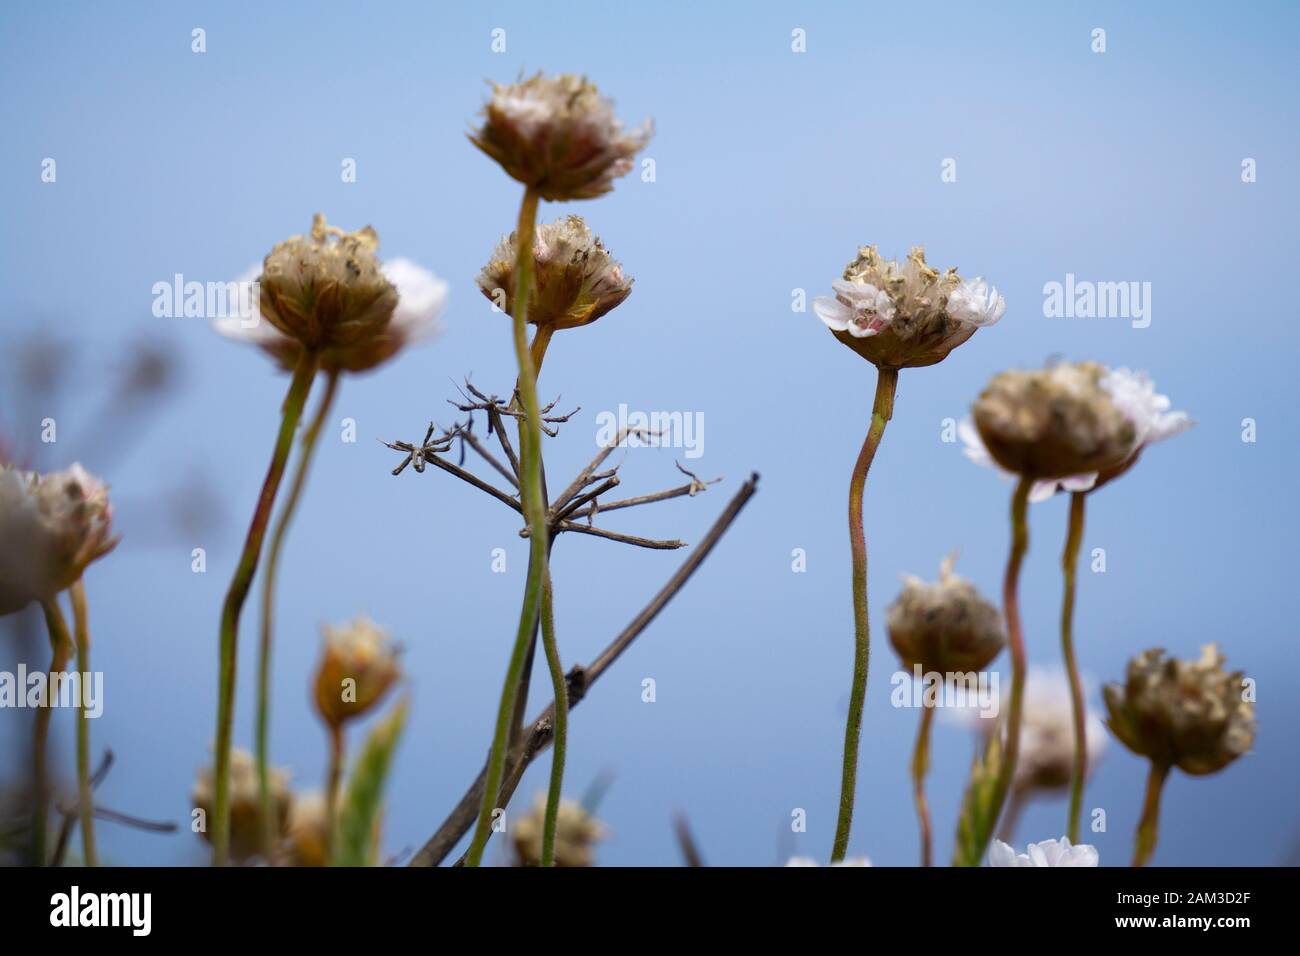 Armeria Maritima plant closeup detail on its withered flower heads against blue sky, growing at the cliffs of Astoria, Spain Stock Photo